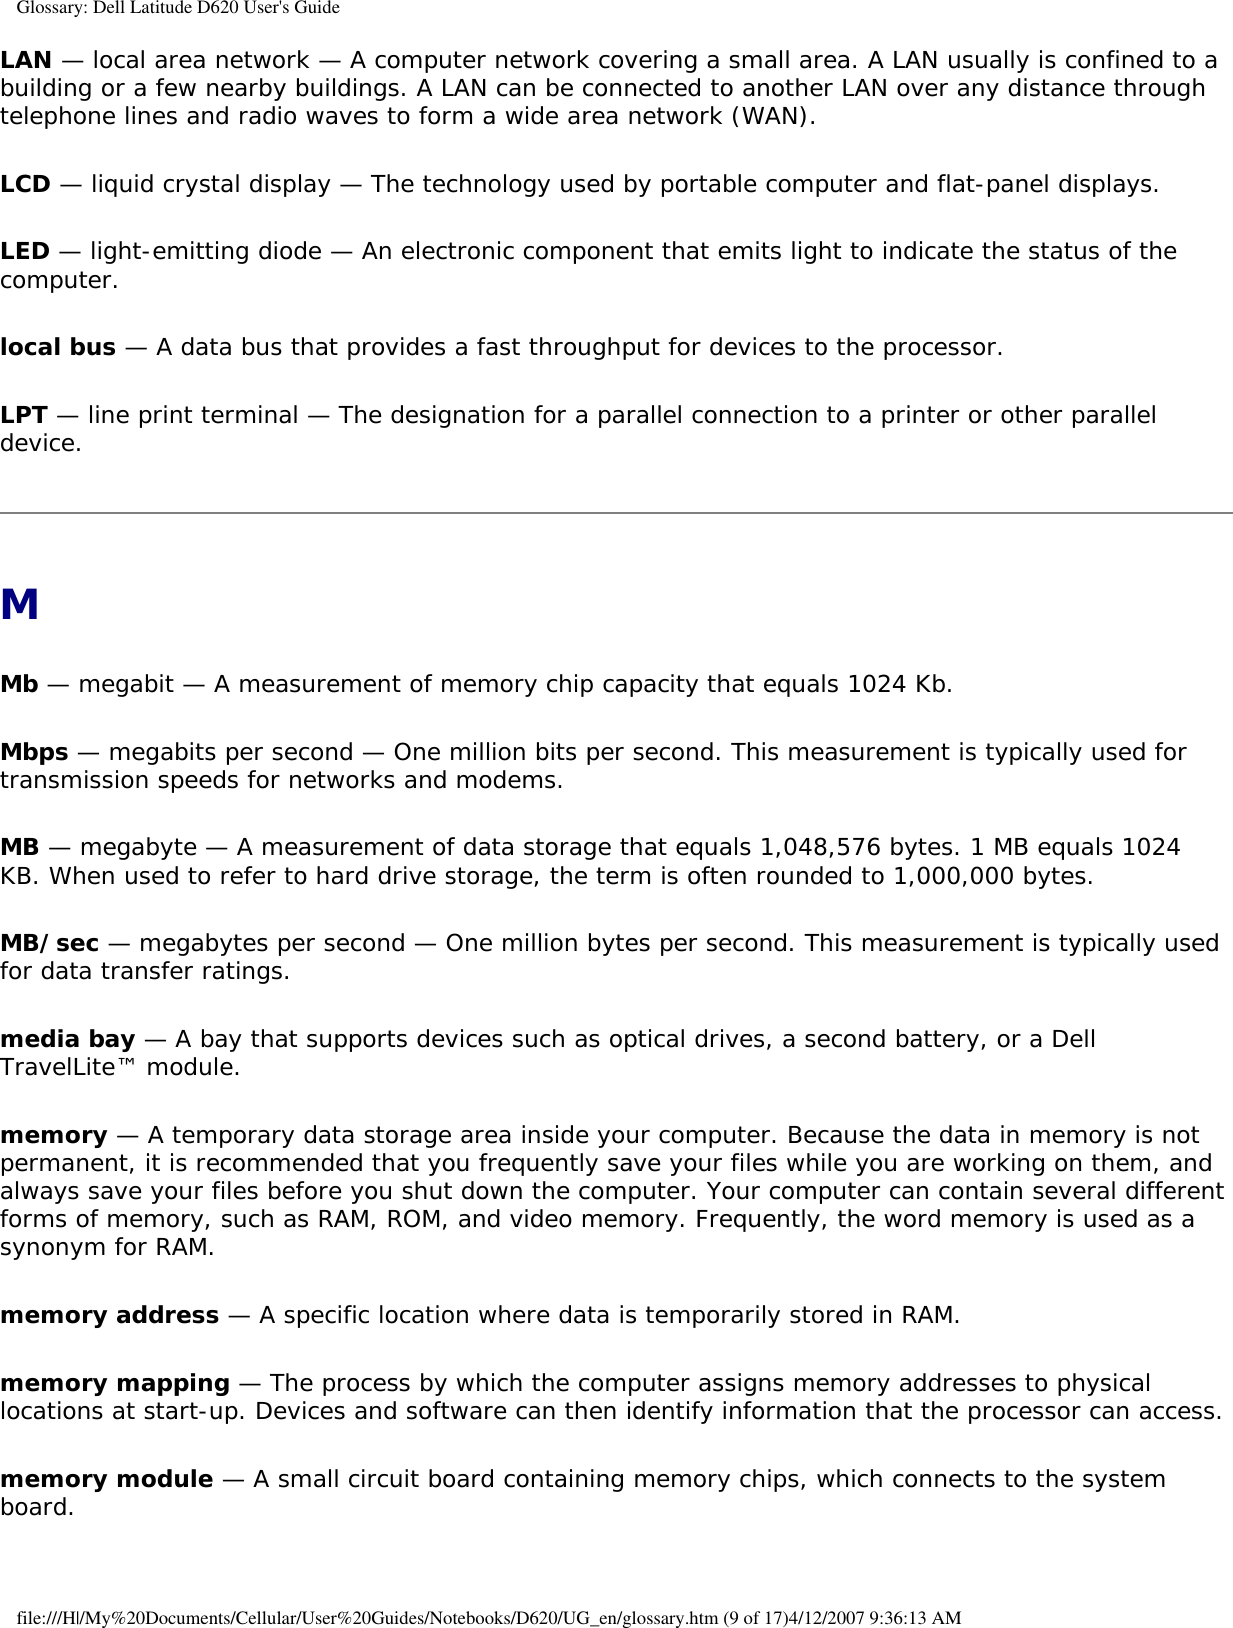 Glossary: Dell Latitude D620 User&apos;s GuideLAN — local area network — A computer network covering a small area. A LAN usually is confined to a building or a few nearby buildings. A LAN can be connected to another LAN over any distance through telephone lines and radio waves to form a wide area network (WAN).LCD — liquid crystal display — The technology used by portable computer and flat-panel displays.LED — light-emitting diode — An electronic component that emits light to indicate the status of the computer.local bus — A data bus that provides a fast throughput for devices to the processor.LPT — line print terminal — The designation for a parallel connection to a printer or other parallel device. MMb — megabit — A measurement of memory chip capacity that equals 1024 Kb.Mbps — megabits per second — One million bits per second. This measurement is typically used for transmission speeds for networks and modems.MB — megabyte — A measurement of data storage that equals 1,048,576 bytes. 1 MB equals 1024 KB. When used to refer to hard drive storage, the term is often rounded to 1,000,000 bytes.MB/sec — megabytes per second — One million bytes per second. This measurement is typically used for data transfer ratings.media bay — A bay that supports devices such as optical drives, a second battery, or a Dell TravelLite™ module.memory — A temporary data storage area inside your computer. Because the data in memory is not permanent, it is recommended that you frequently save your files while you are working on them, and always save your files before you shut down the computer. Your computer can contain several different forms of memory, such as RAM, ROM, and video memory. Frequently, the word memory is used as a synonym for RAM.memory address — A specific location where data is temporarily stored in RAM.memory mapping — The process by which the computer assigns memory addresses to physical locations at start-up. Devices and software can then identify information that the processor can access.memory module — A small circuit board containing memory chips, which connects to the system board.file:///H|/My%20Documents/Cellular/User%20Guides/Notebooks/D620/UG_en/glossary.htm (9 of 17)4/12/2007 9:36:13 AM